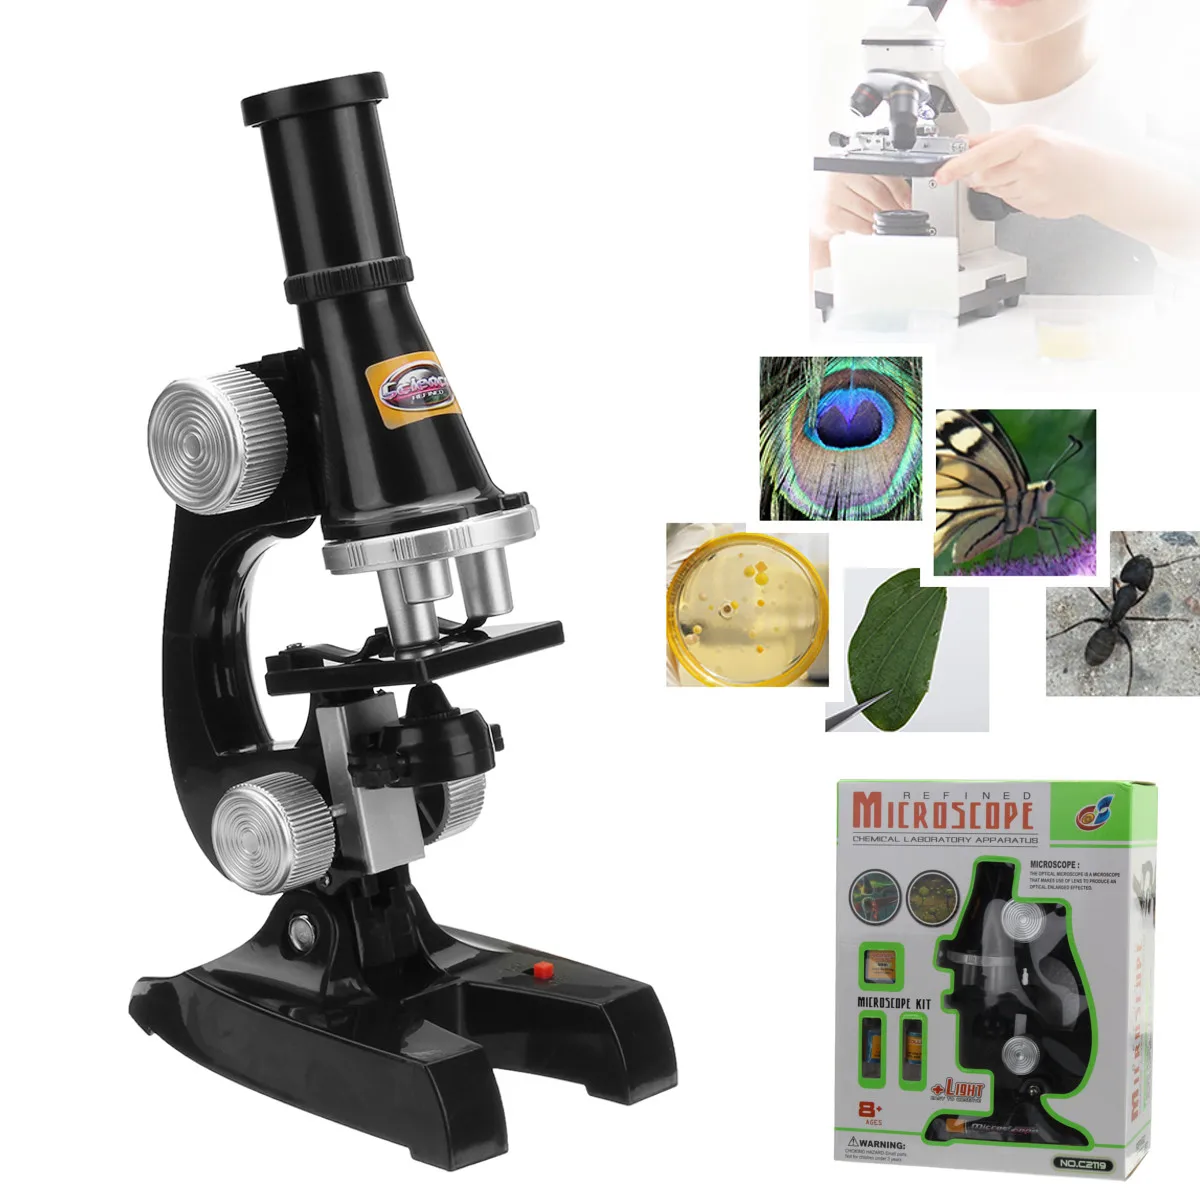 

LED Lab Microscope Kit 100X-200X- 450X Home School Science Educational Toy Gift Refined For Kids Child Biological Microscope